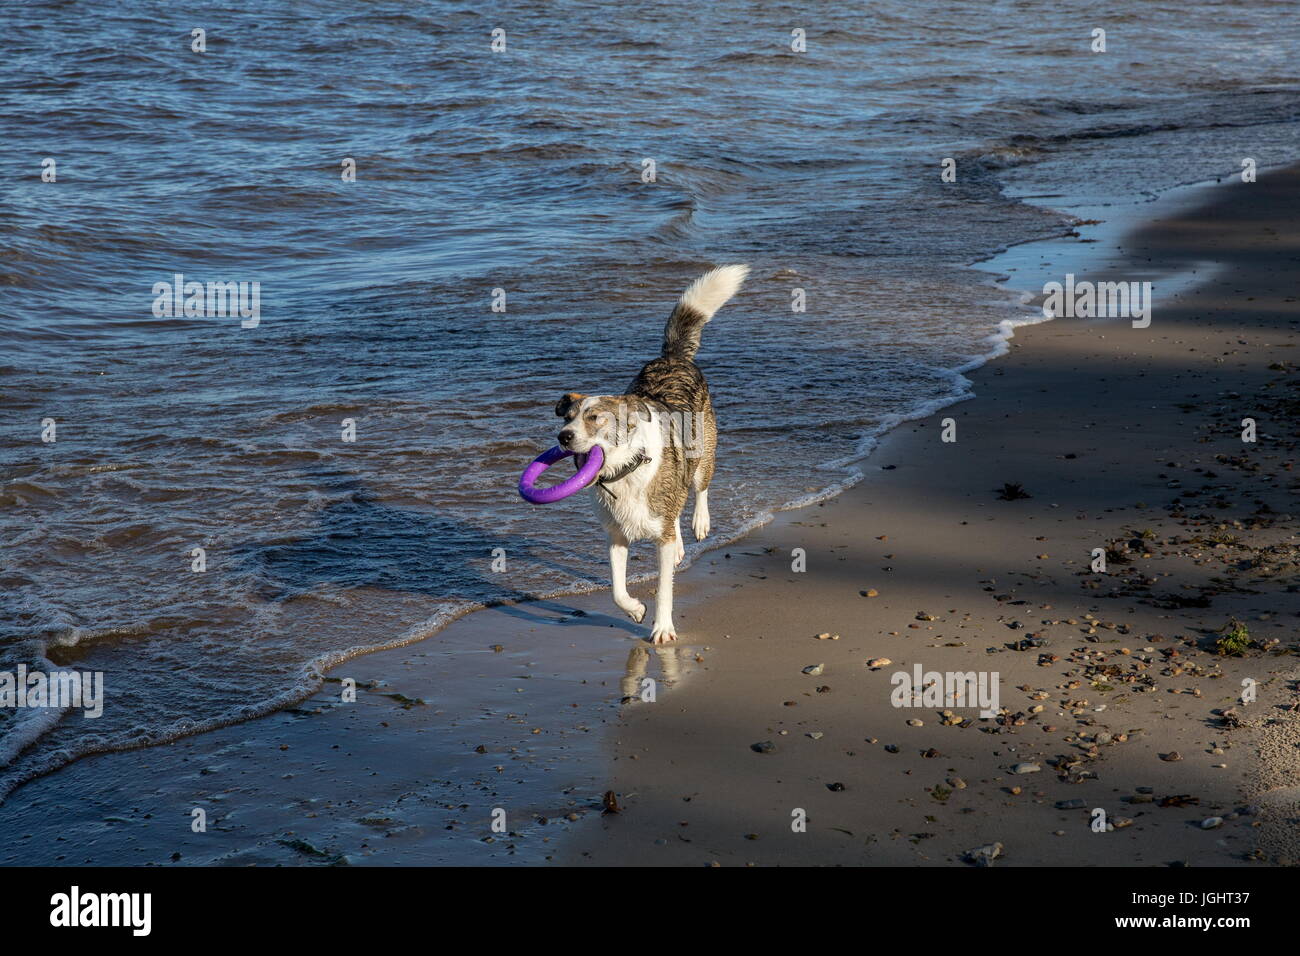 The dog is playing on the seashore Stock Photo